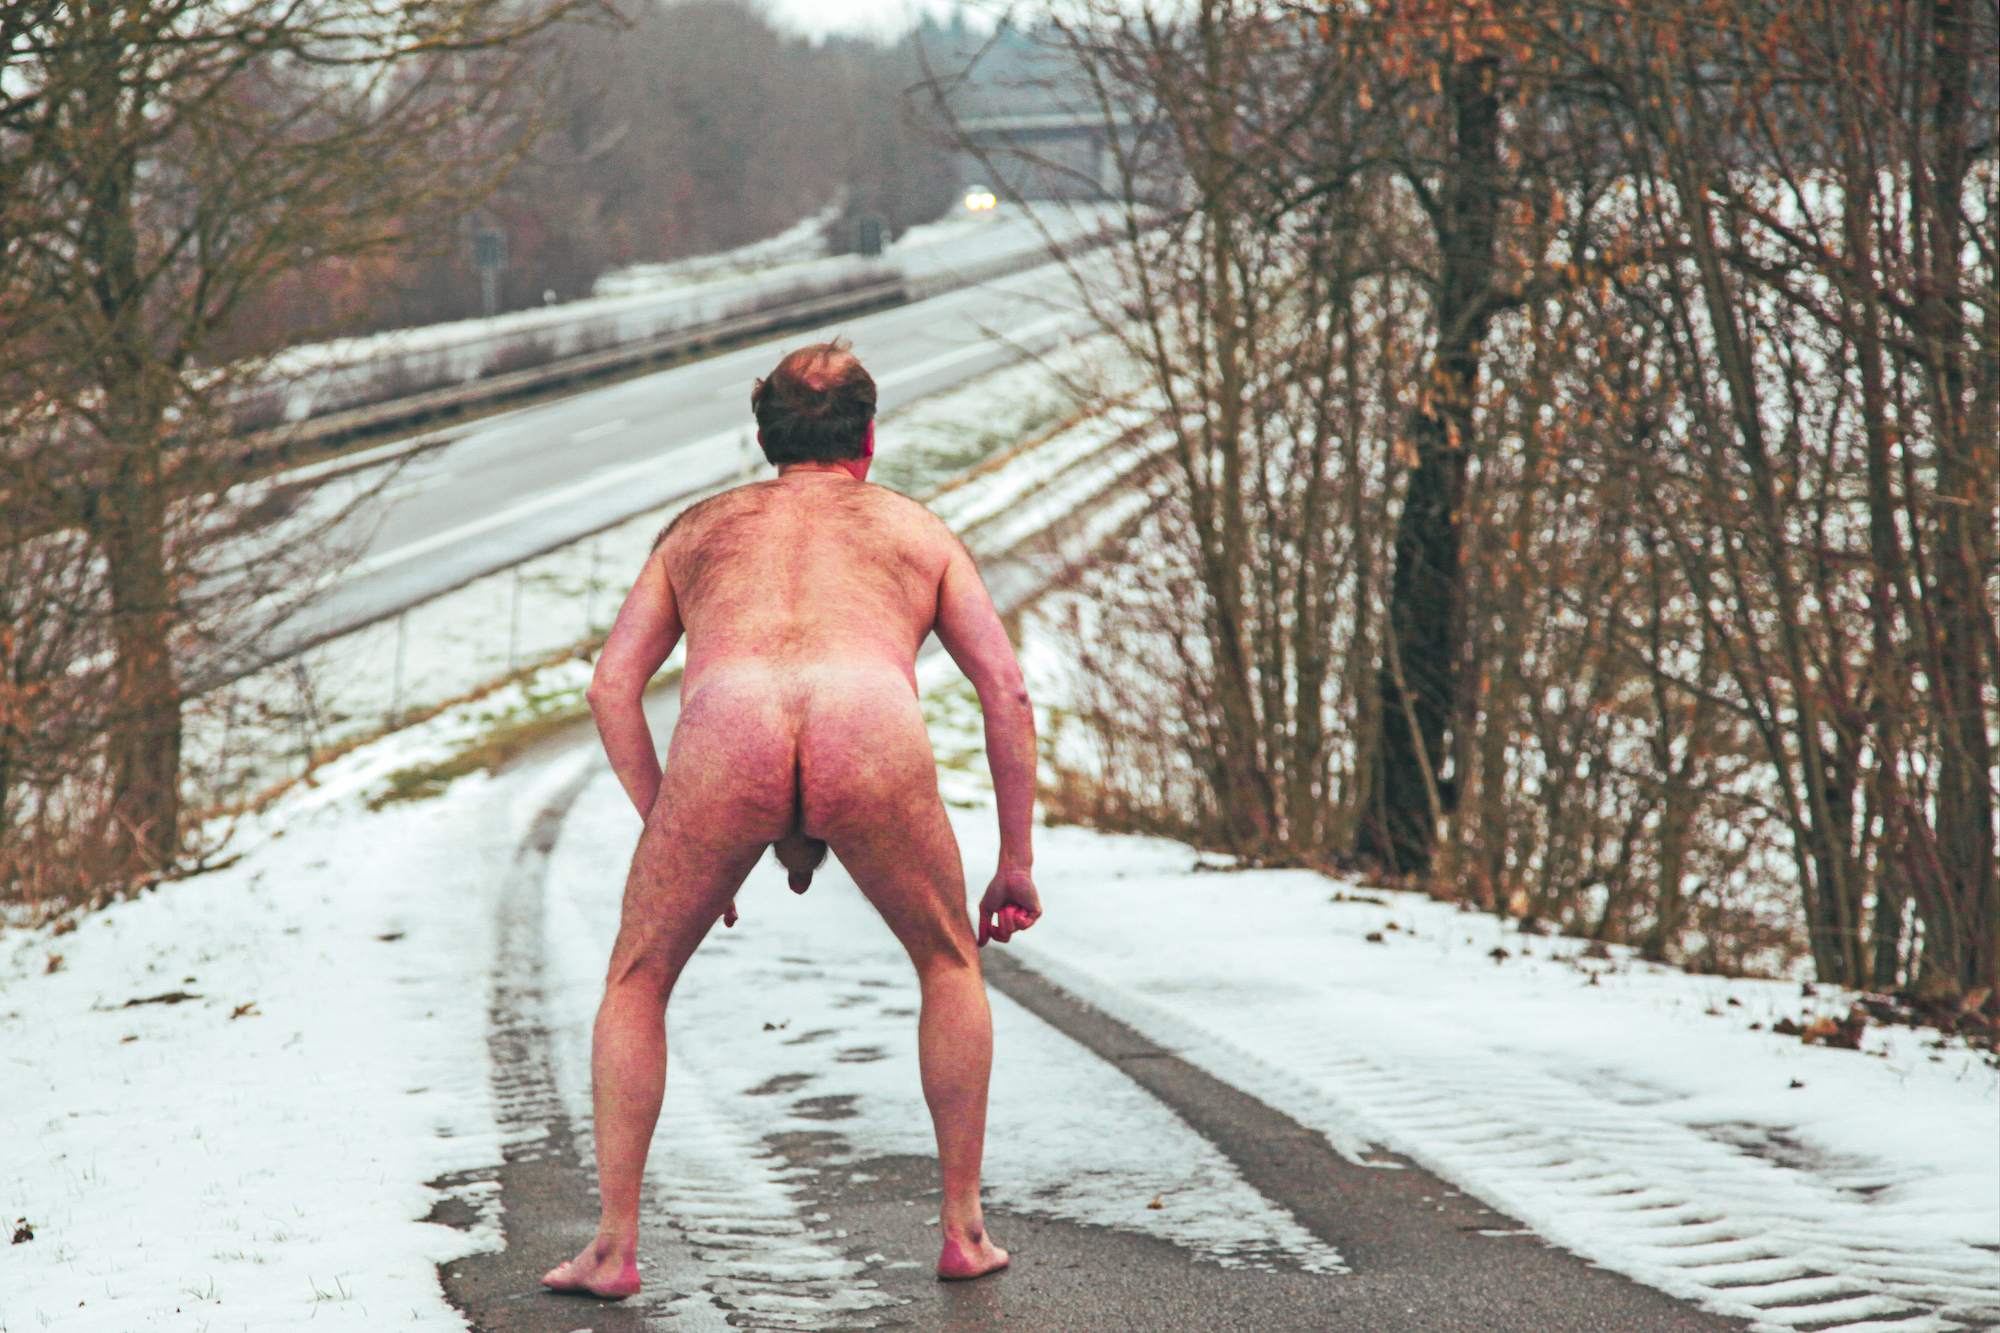 Male nude in the snow next to a highway